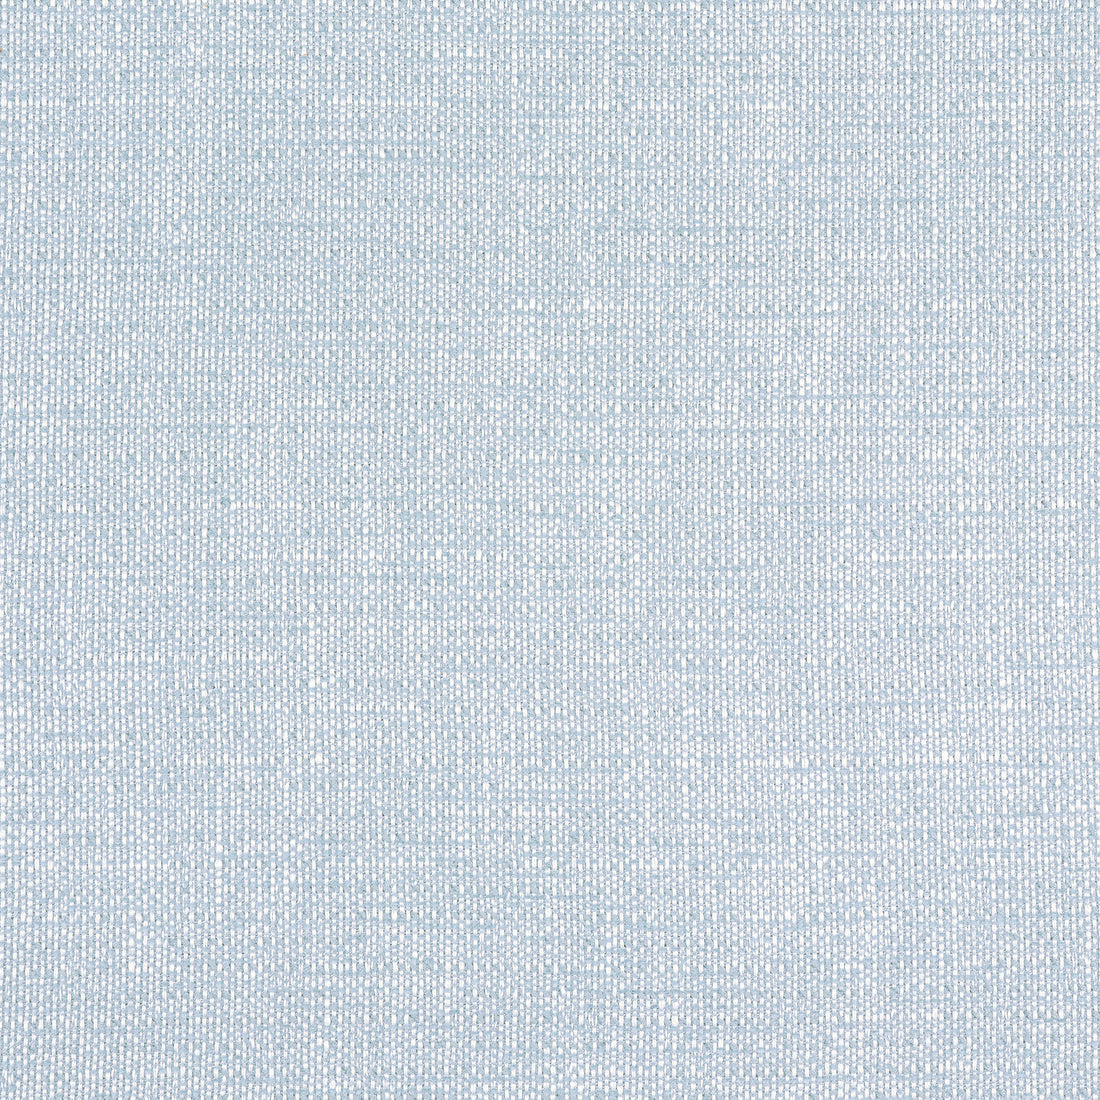 Petra fabric in powder color - pattern number W8739 - by Thibaut in the Haven Textures collection